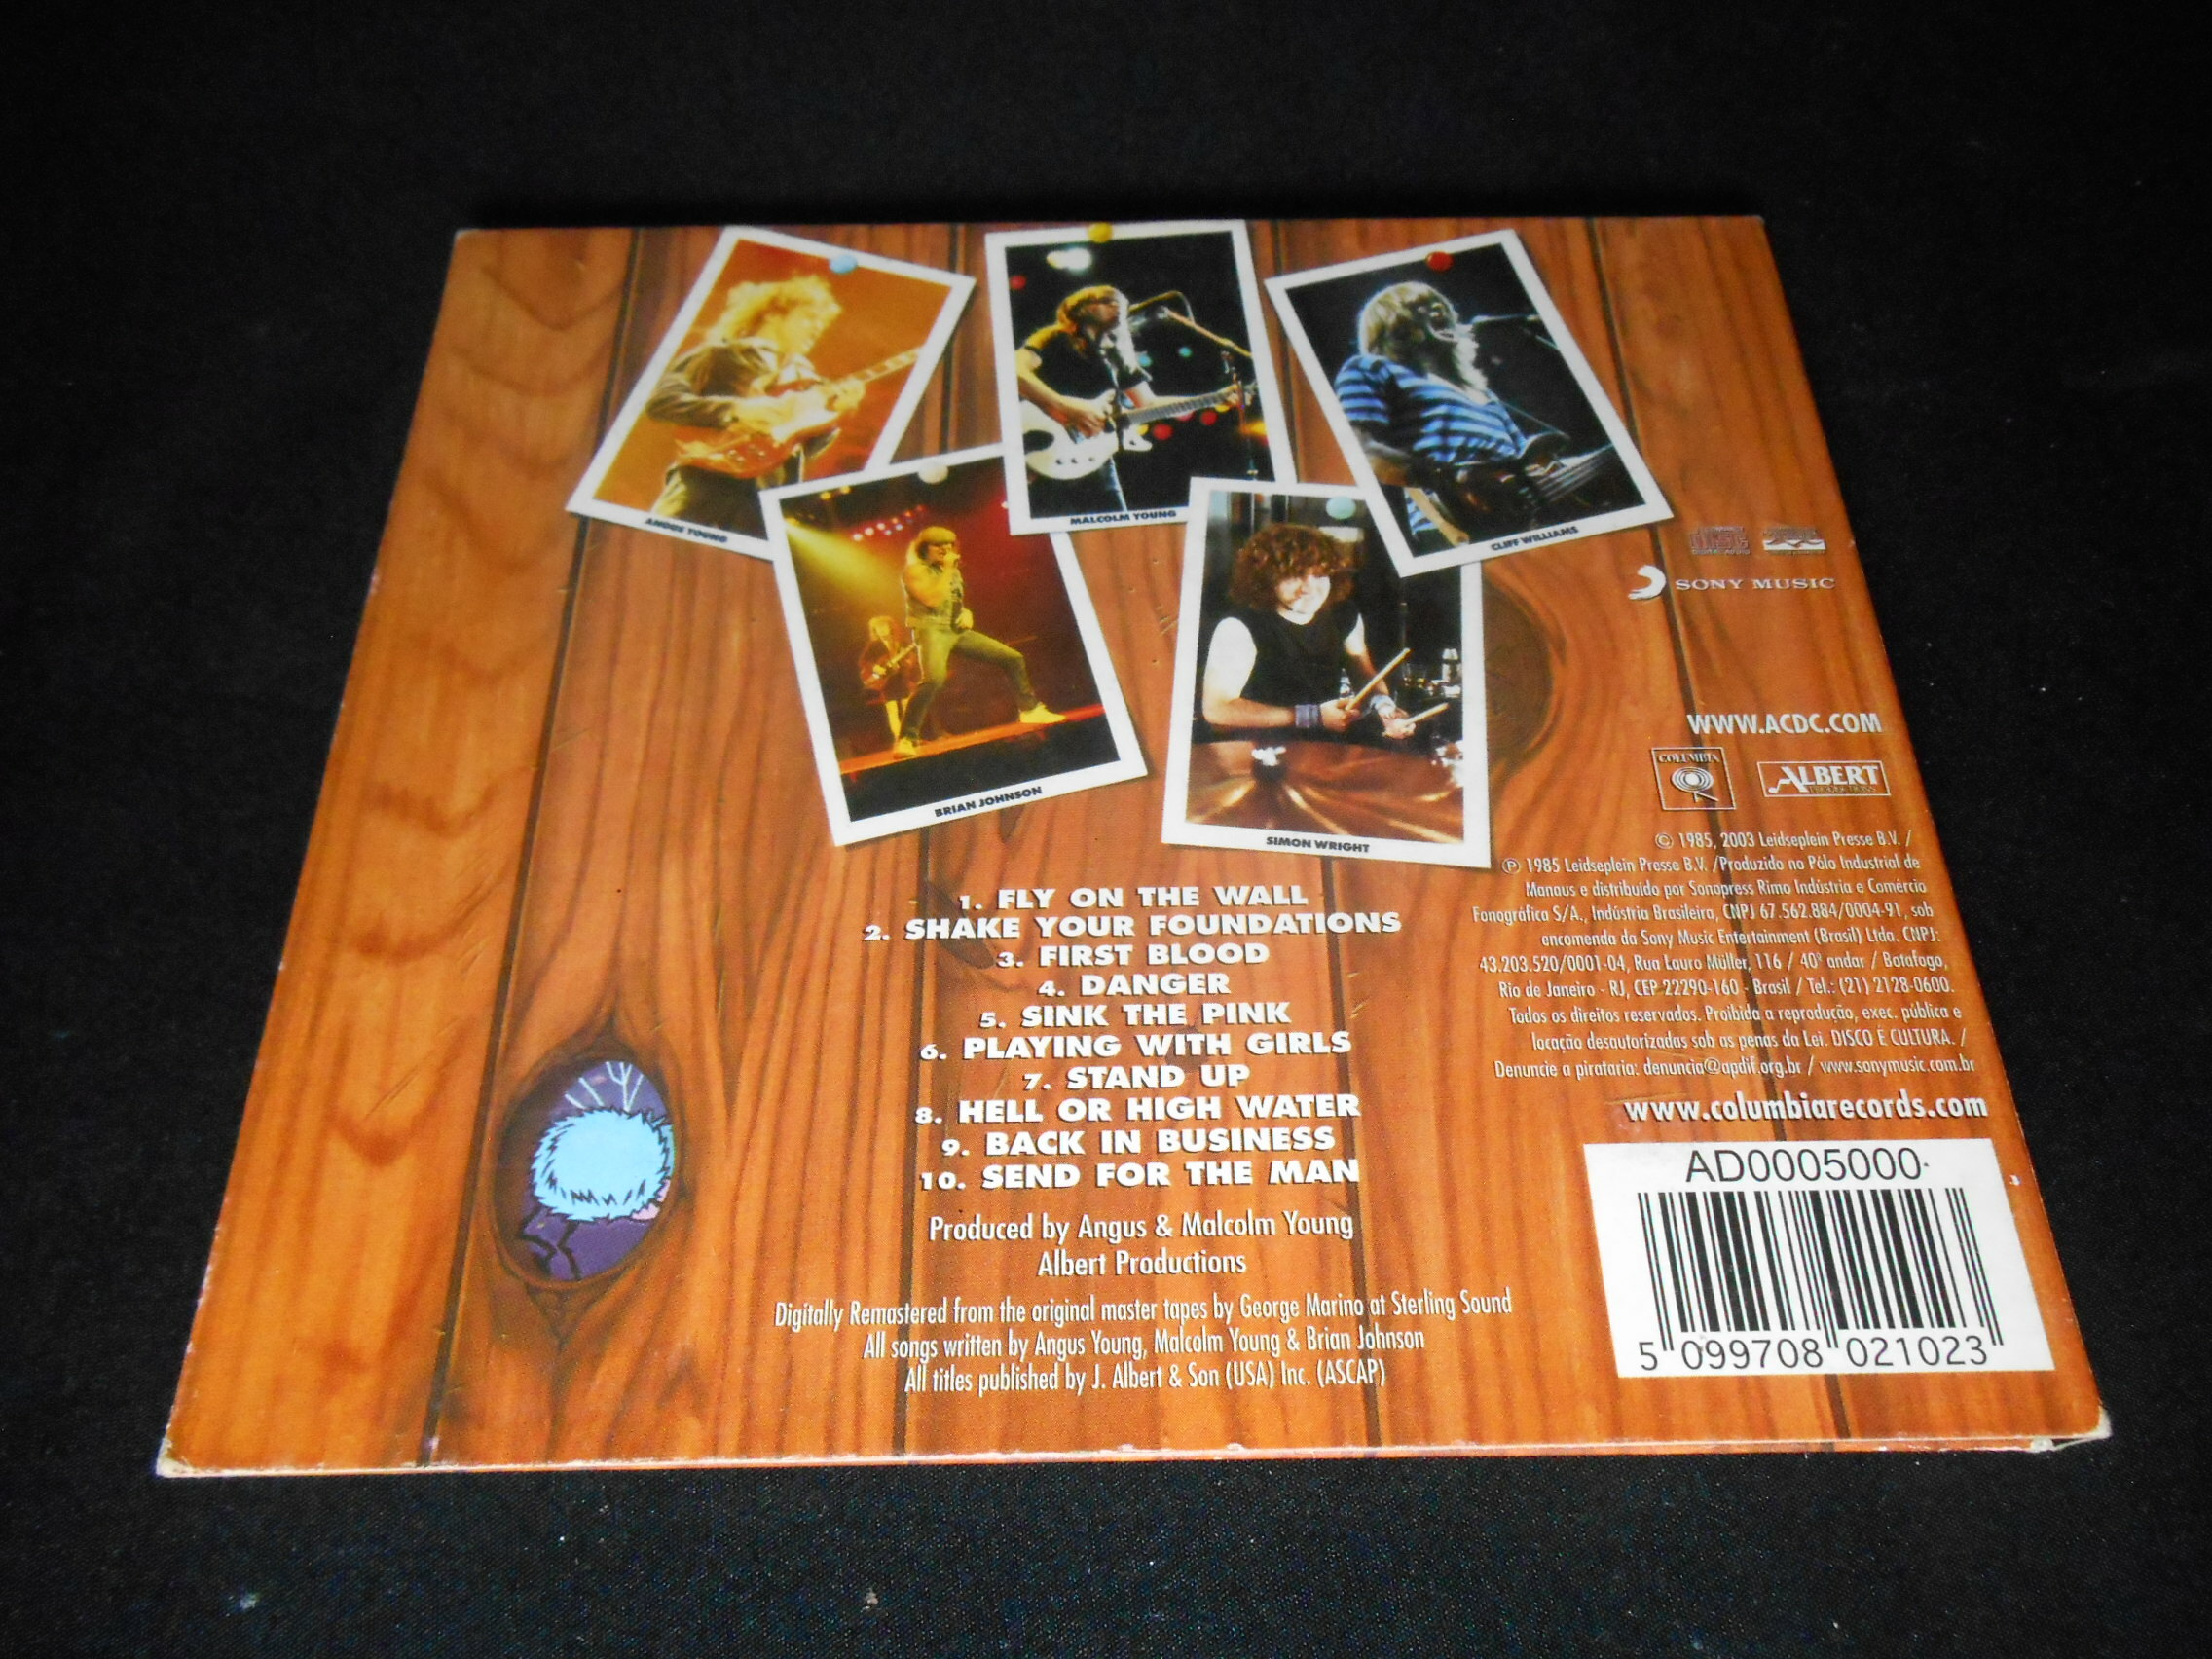 CD - AC/DC - Fly on the Wall (Digipack)